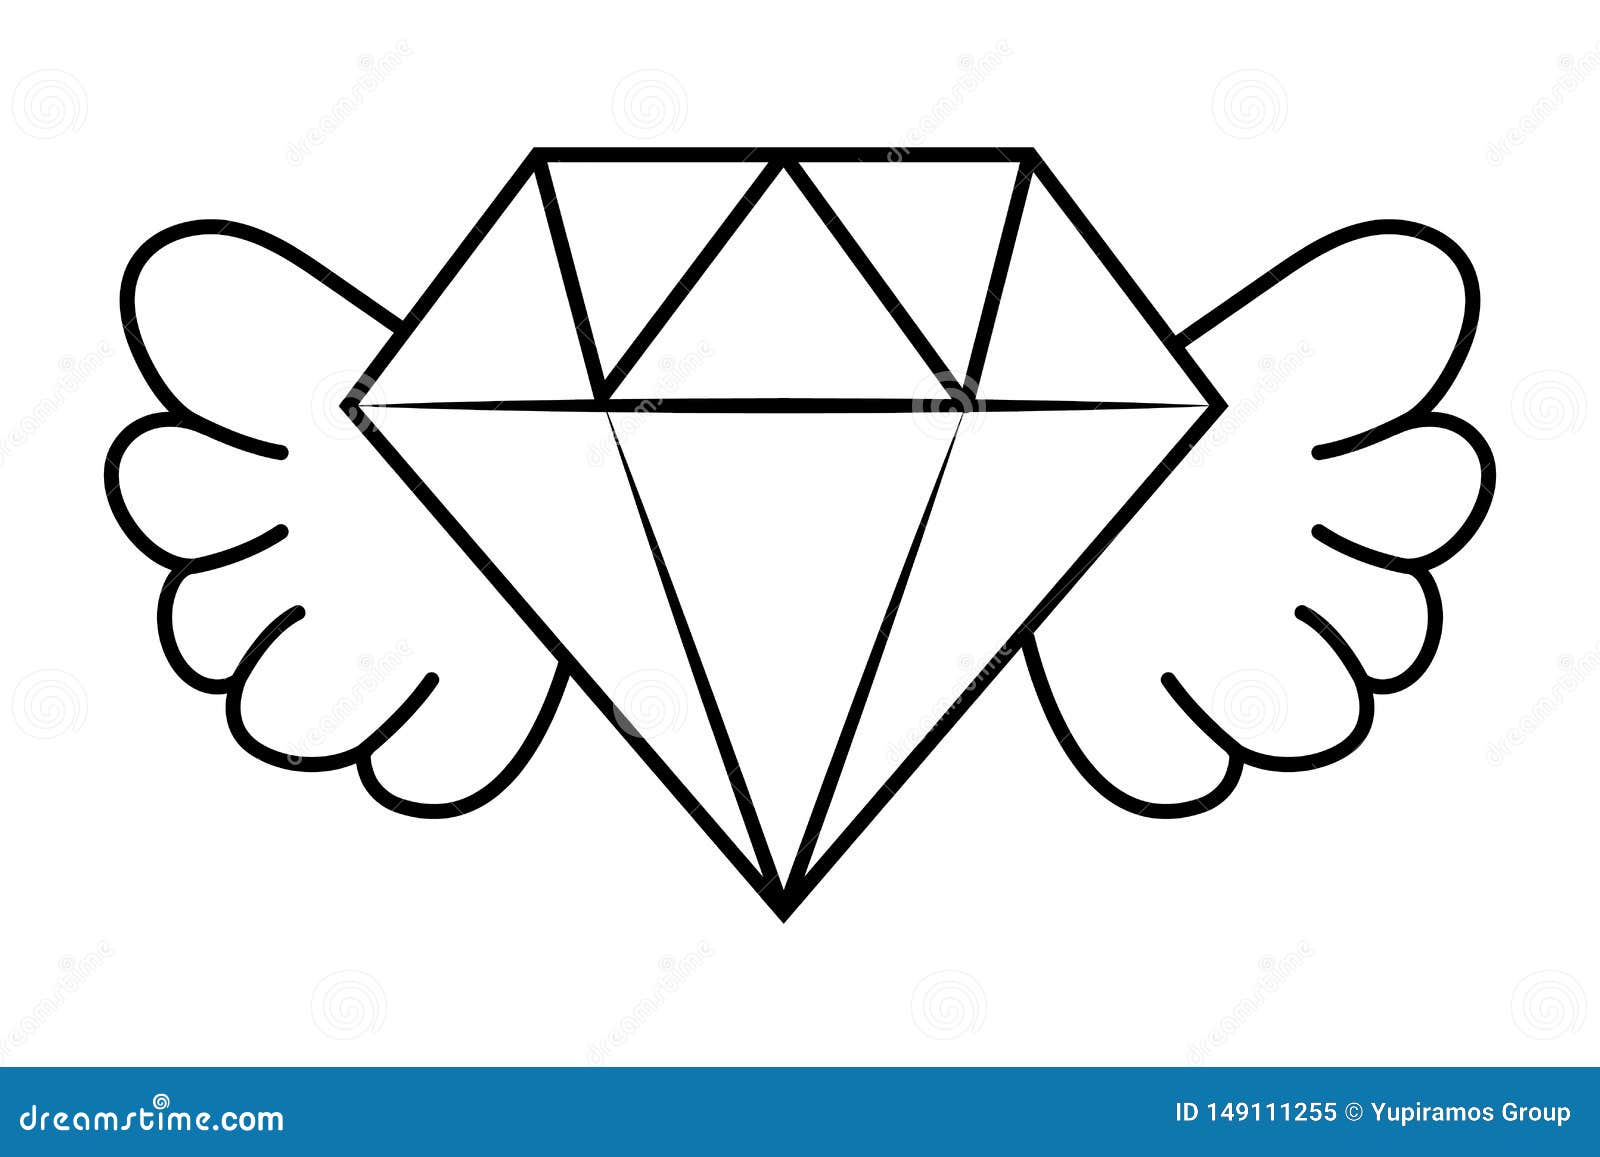 Diamons with Wings Black and White Stock Vector - Illustration of gift